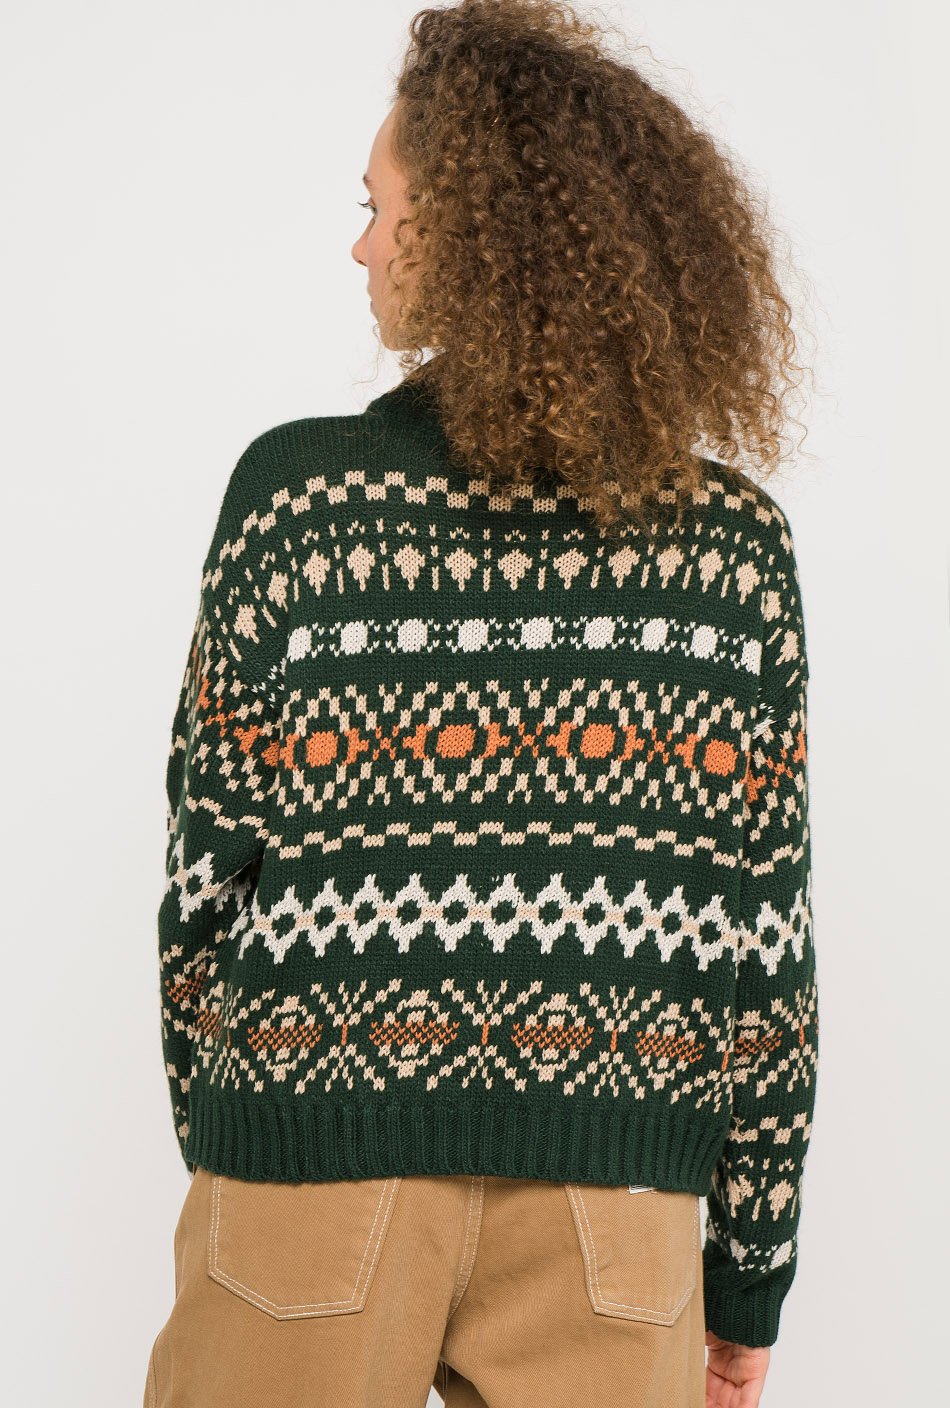 Jacquard Green Knitted Sweater